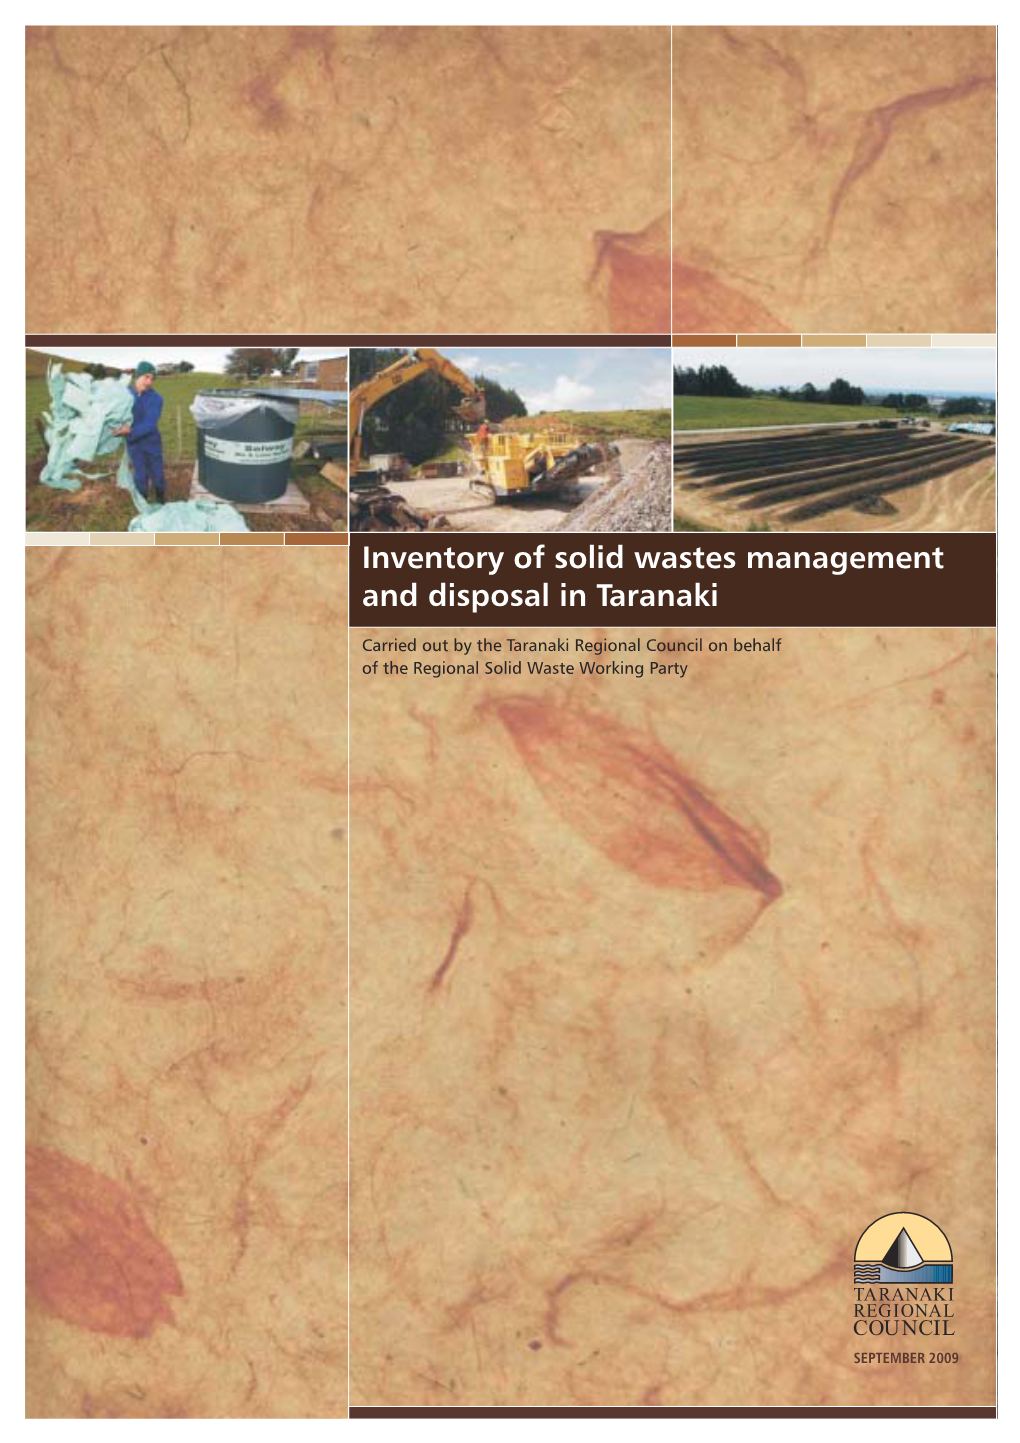 Inventory of Solid Wastes Management and Disposal in Taranaki